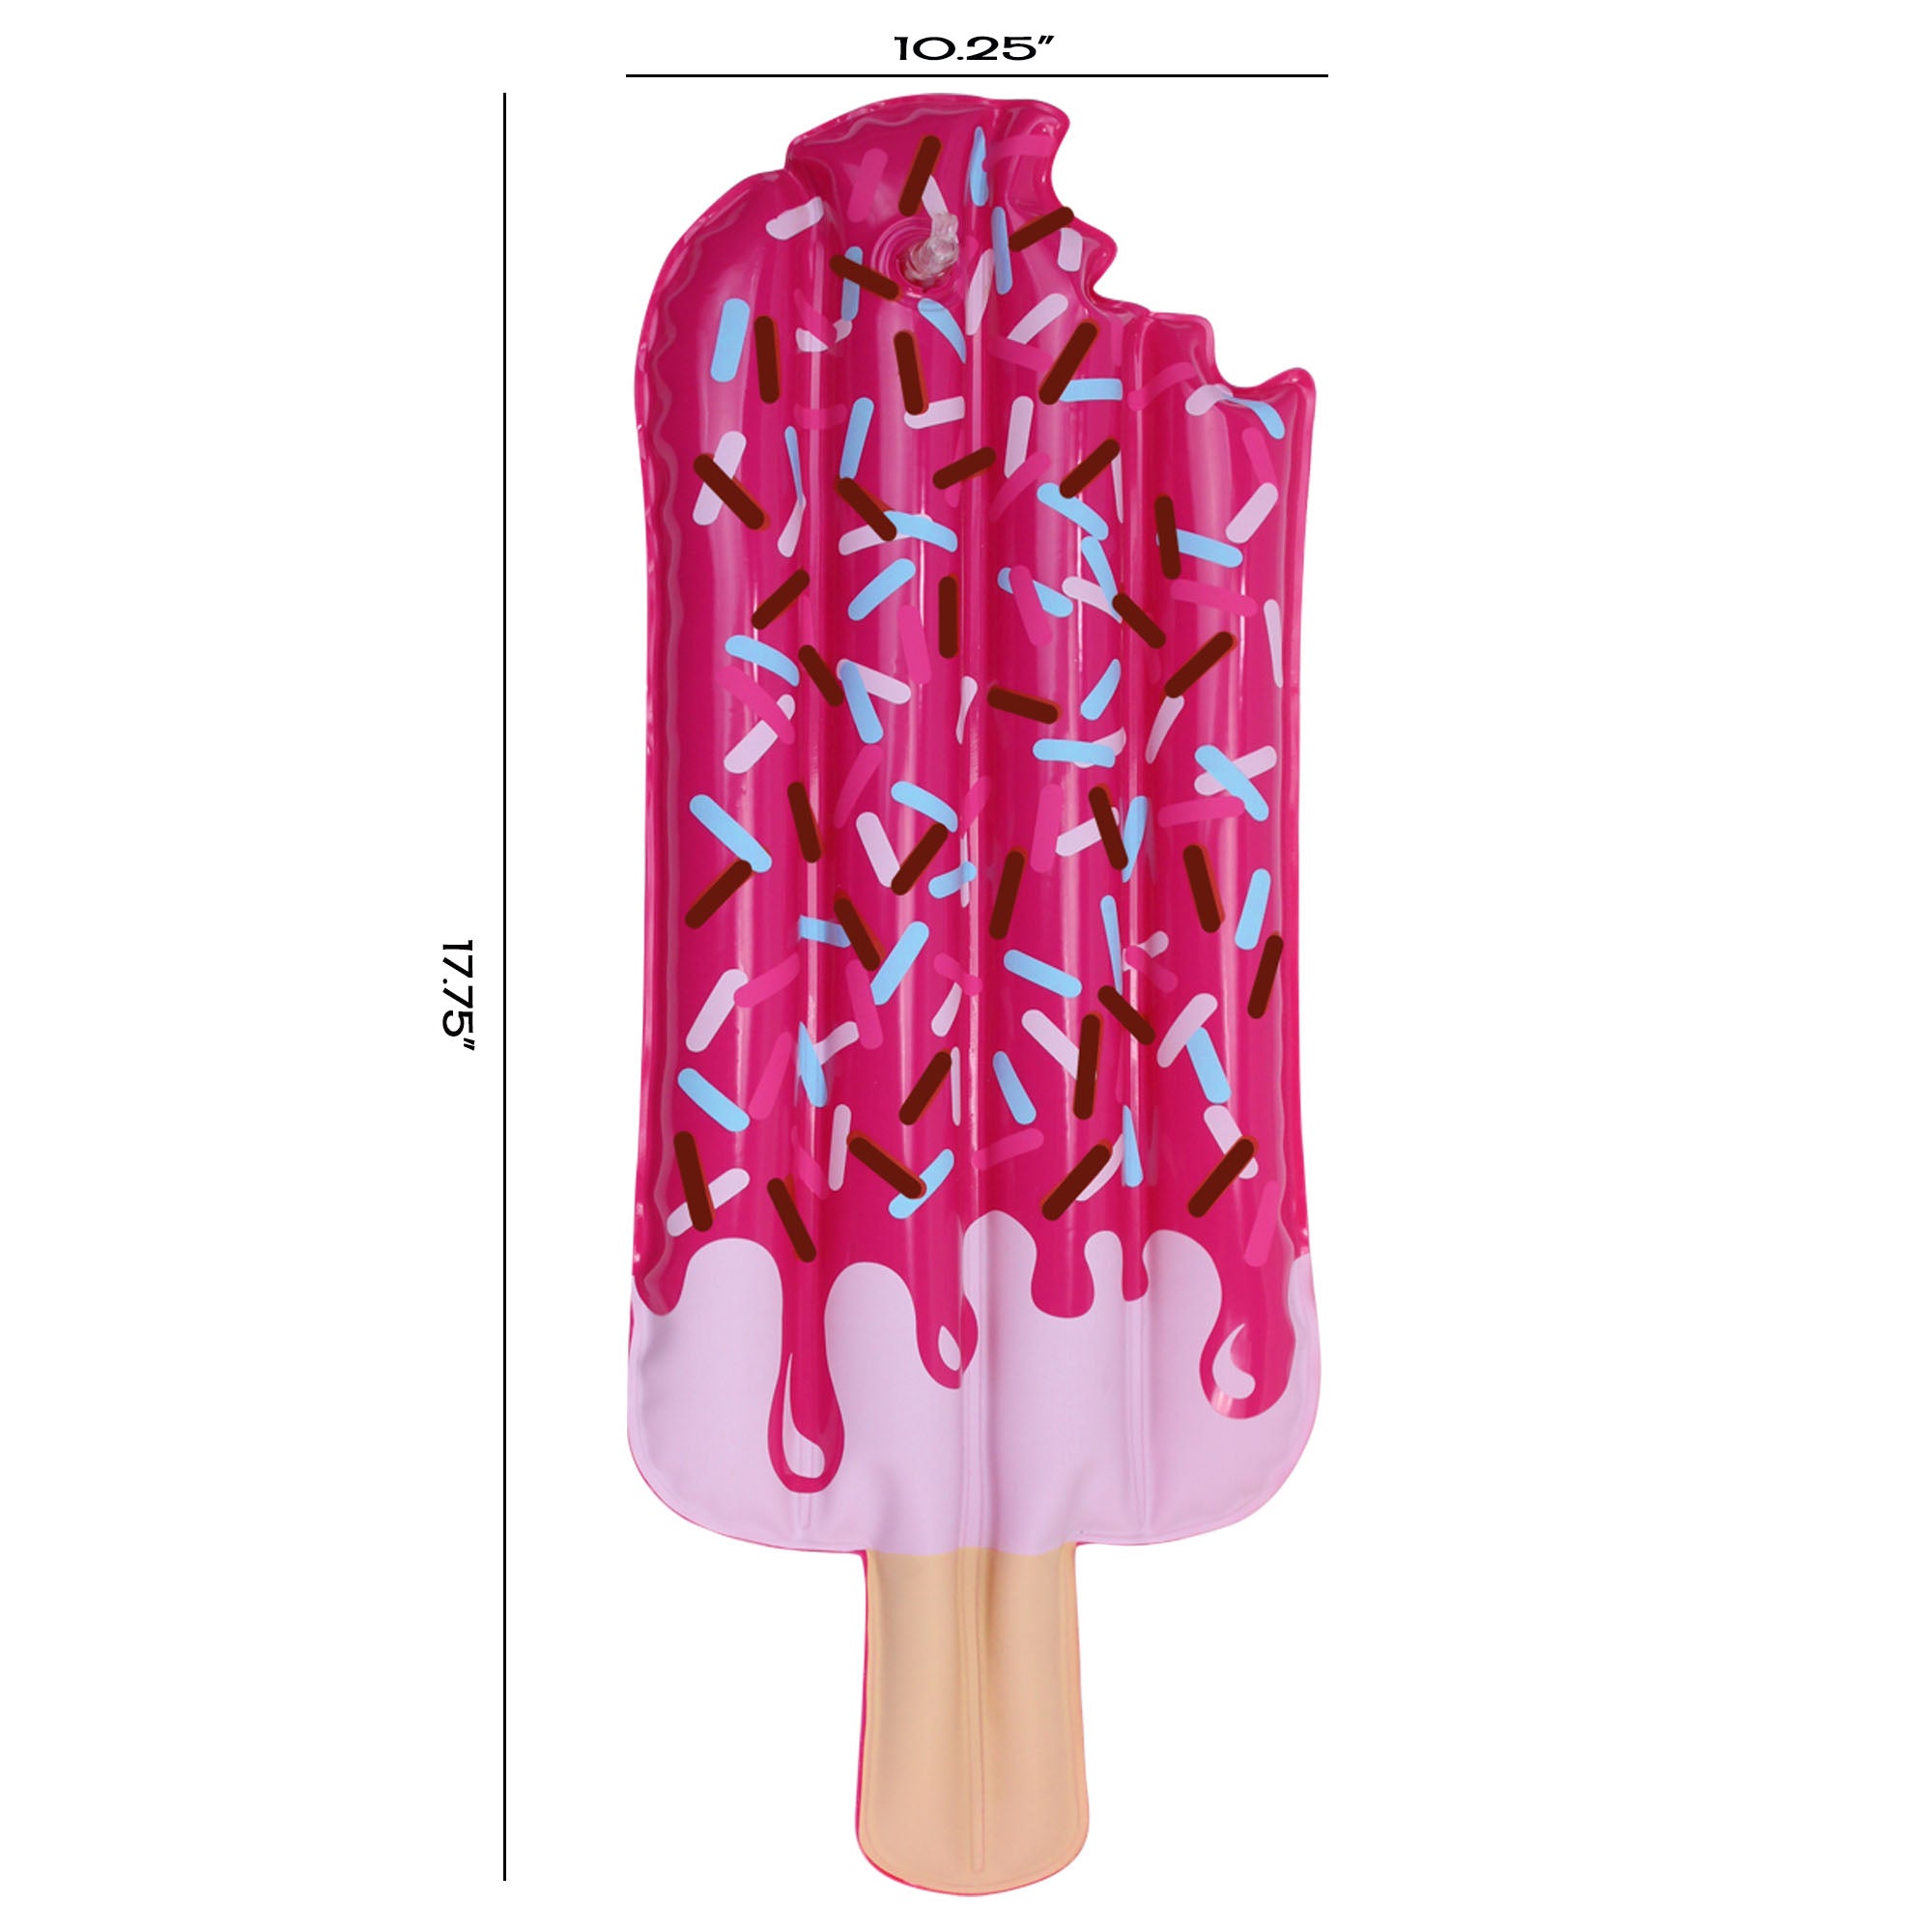 Sophia's - 18" Doll - Inflatable Popsicle Pool Float - Pink